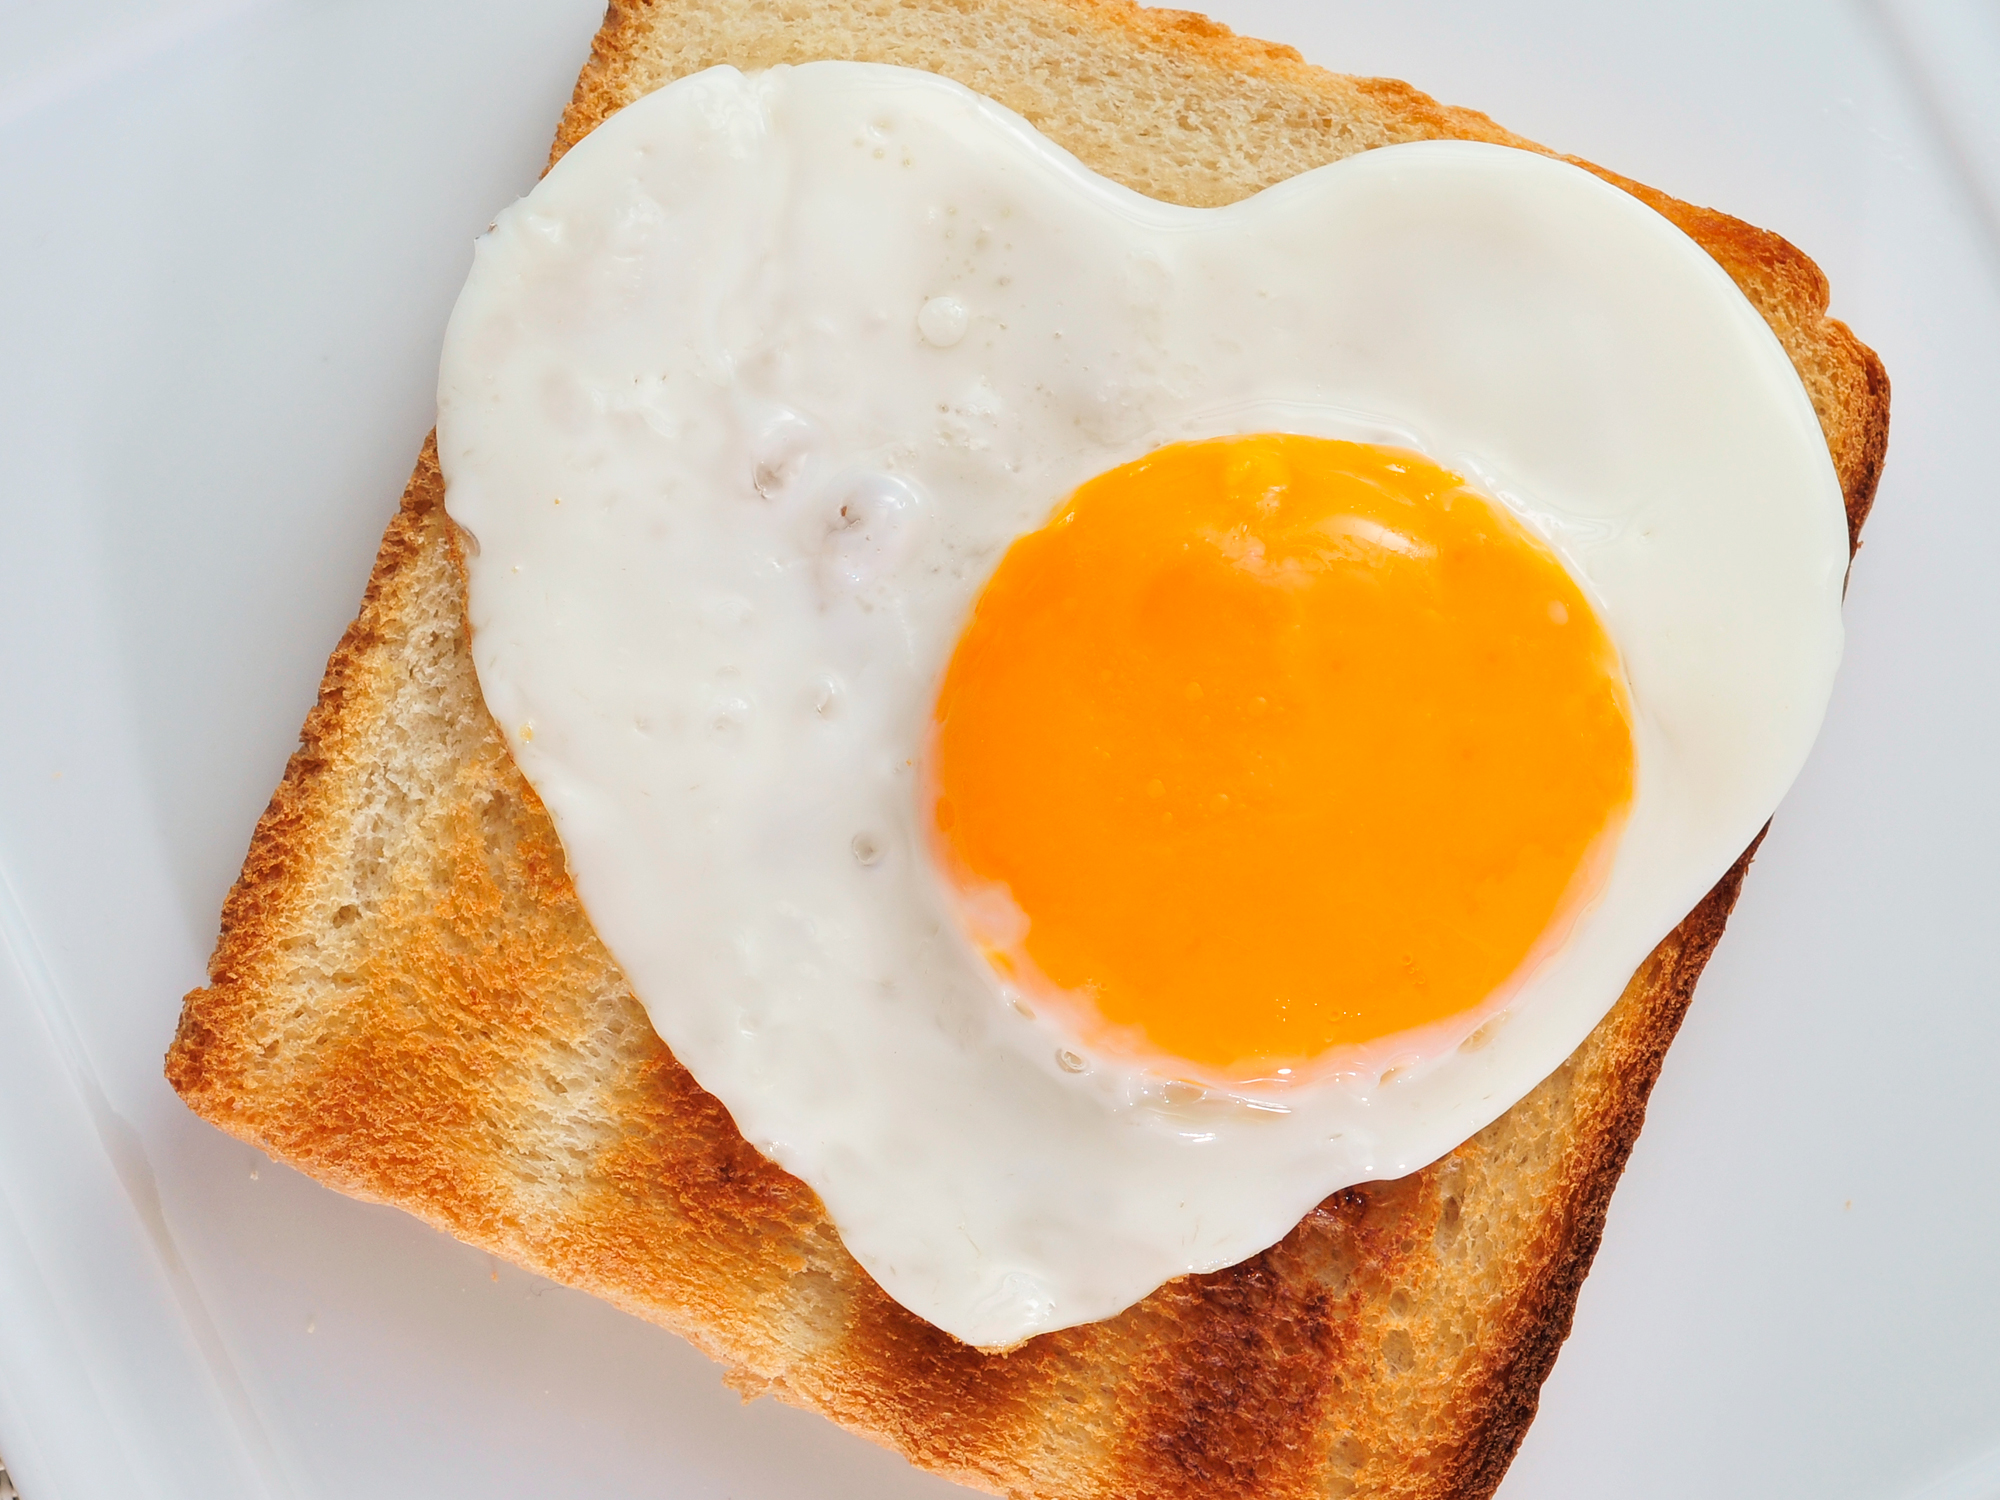 It’s unanimous: Eggs lower cholesterol, heart disease and stroke risk